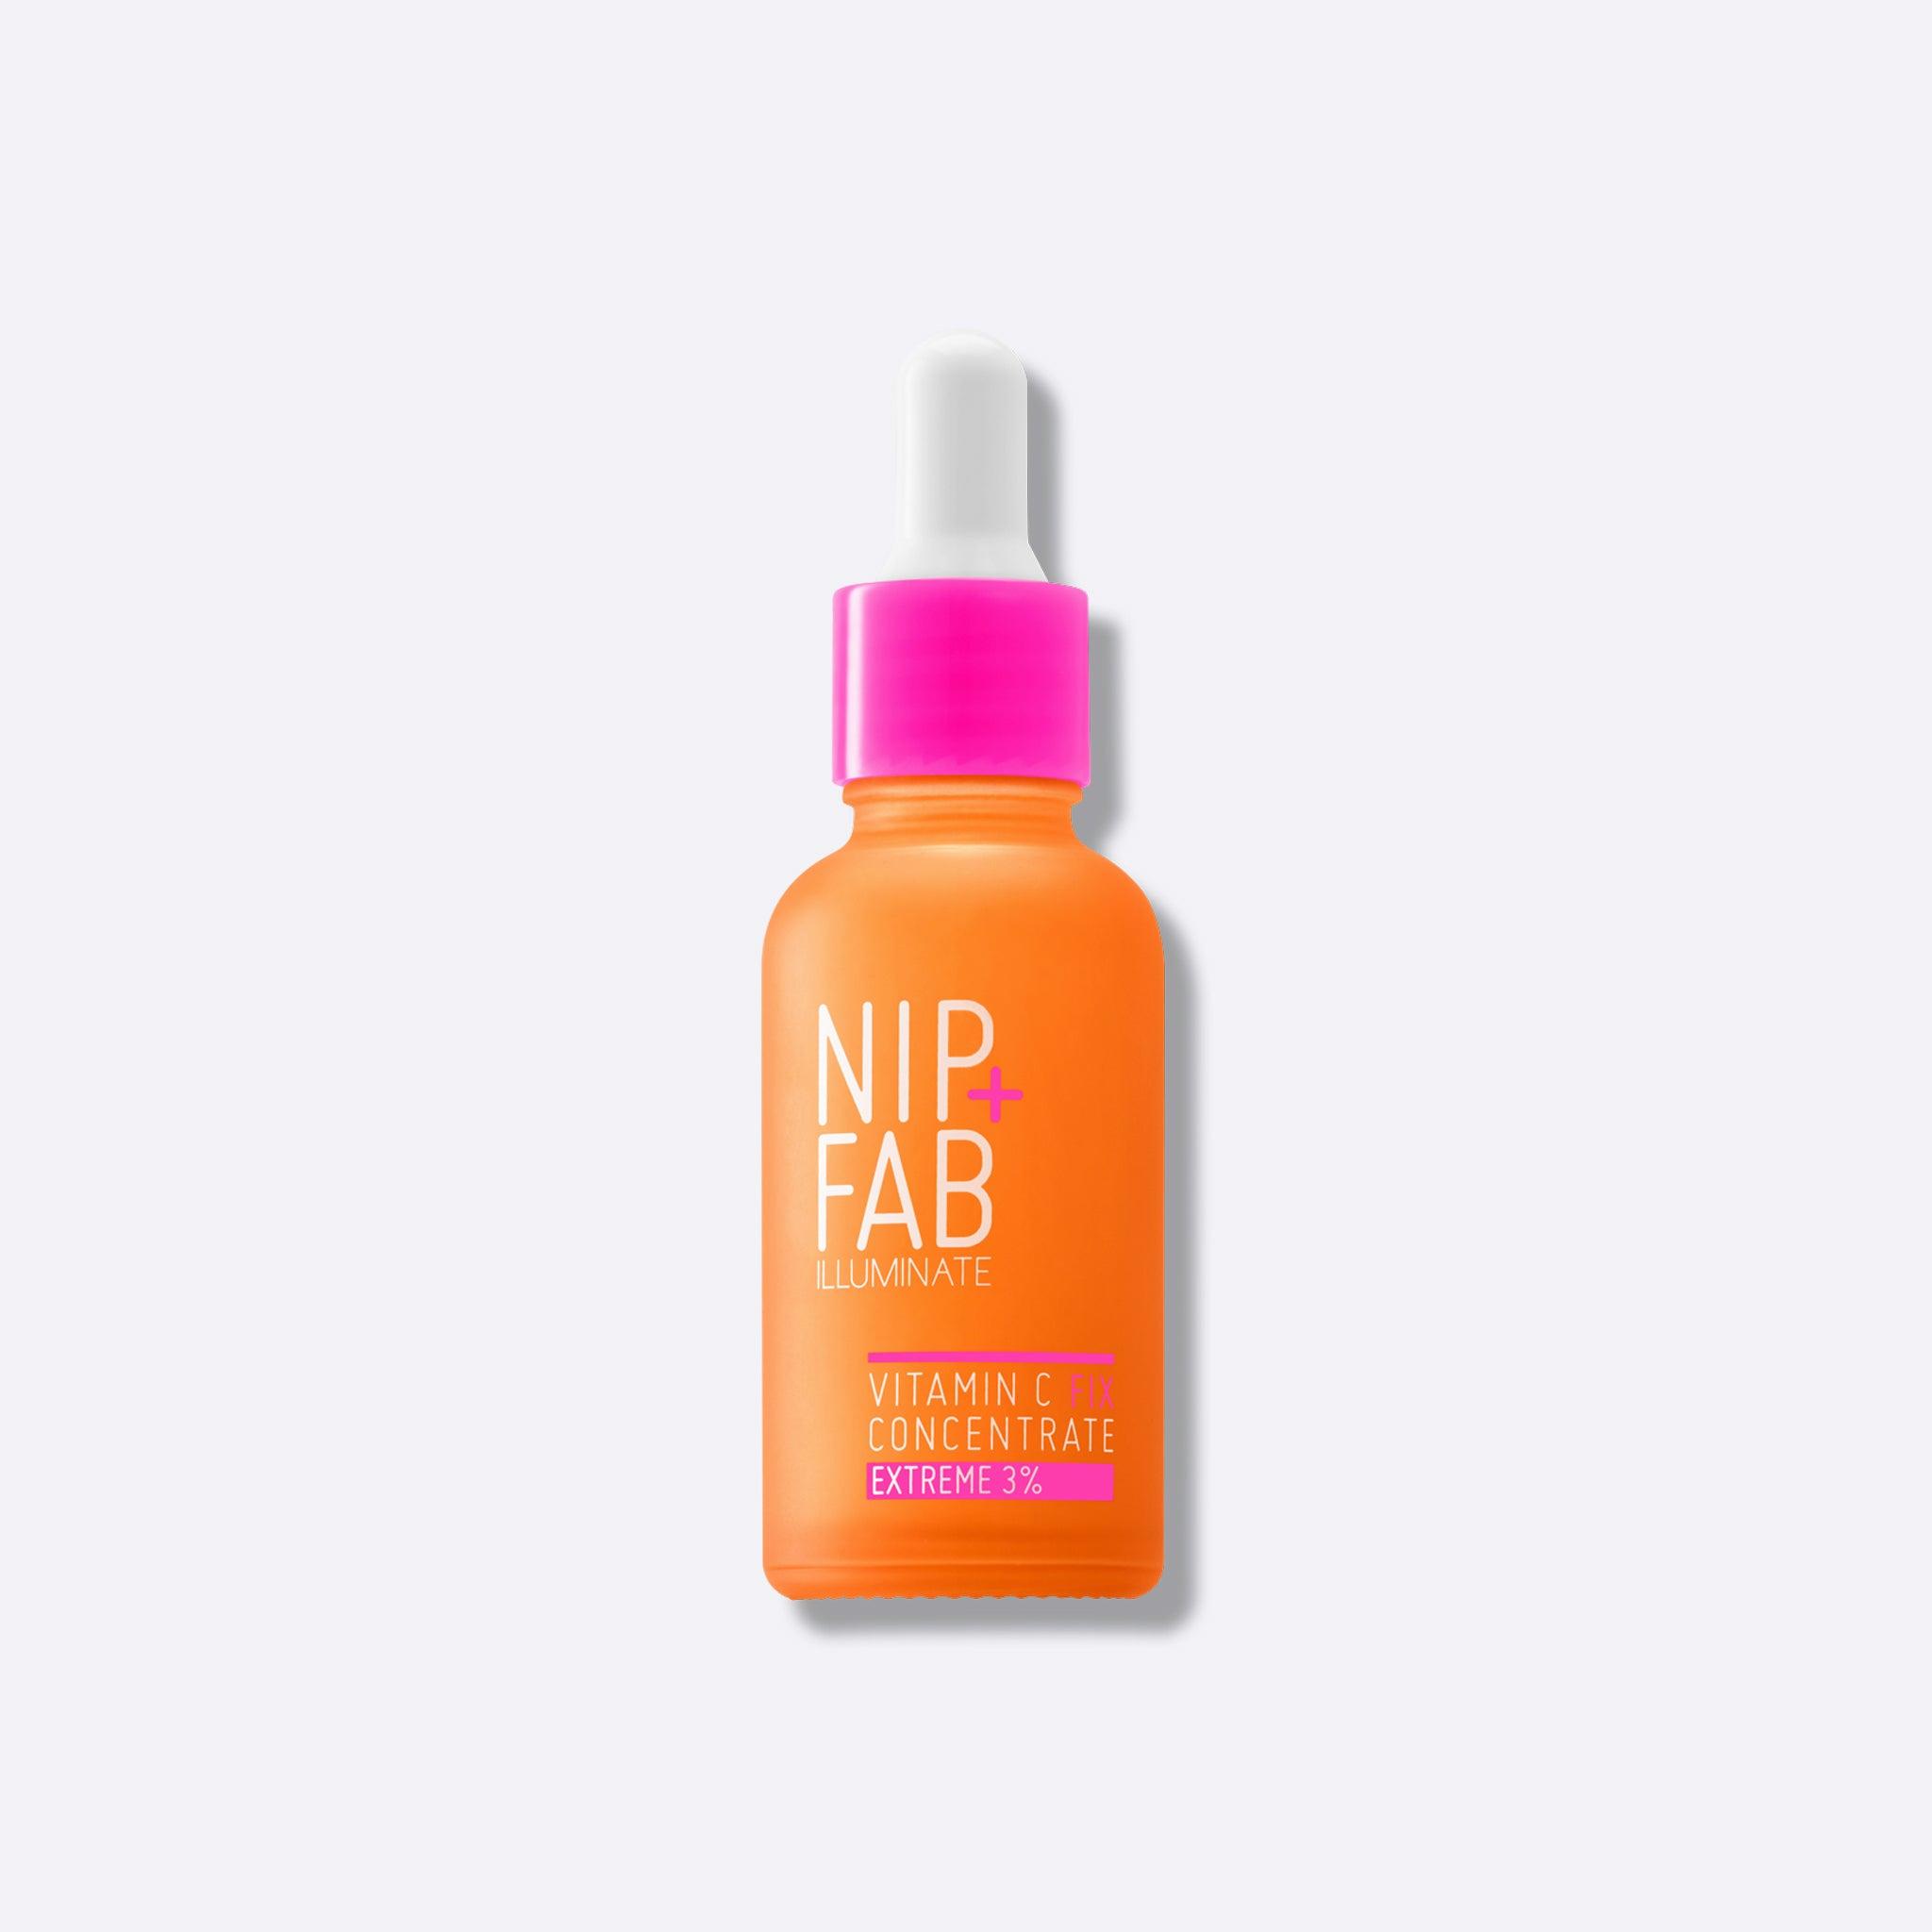 A dropper bottle of Nip+Fabs Vitamin C Fix Concentrate Extreme 3% with a pink cap and label that has white text that reads: NIP+FAB, Illuminate, Vitamin C Fix Concentrate, Extreme 3%.